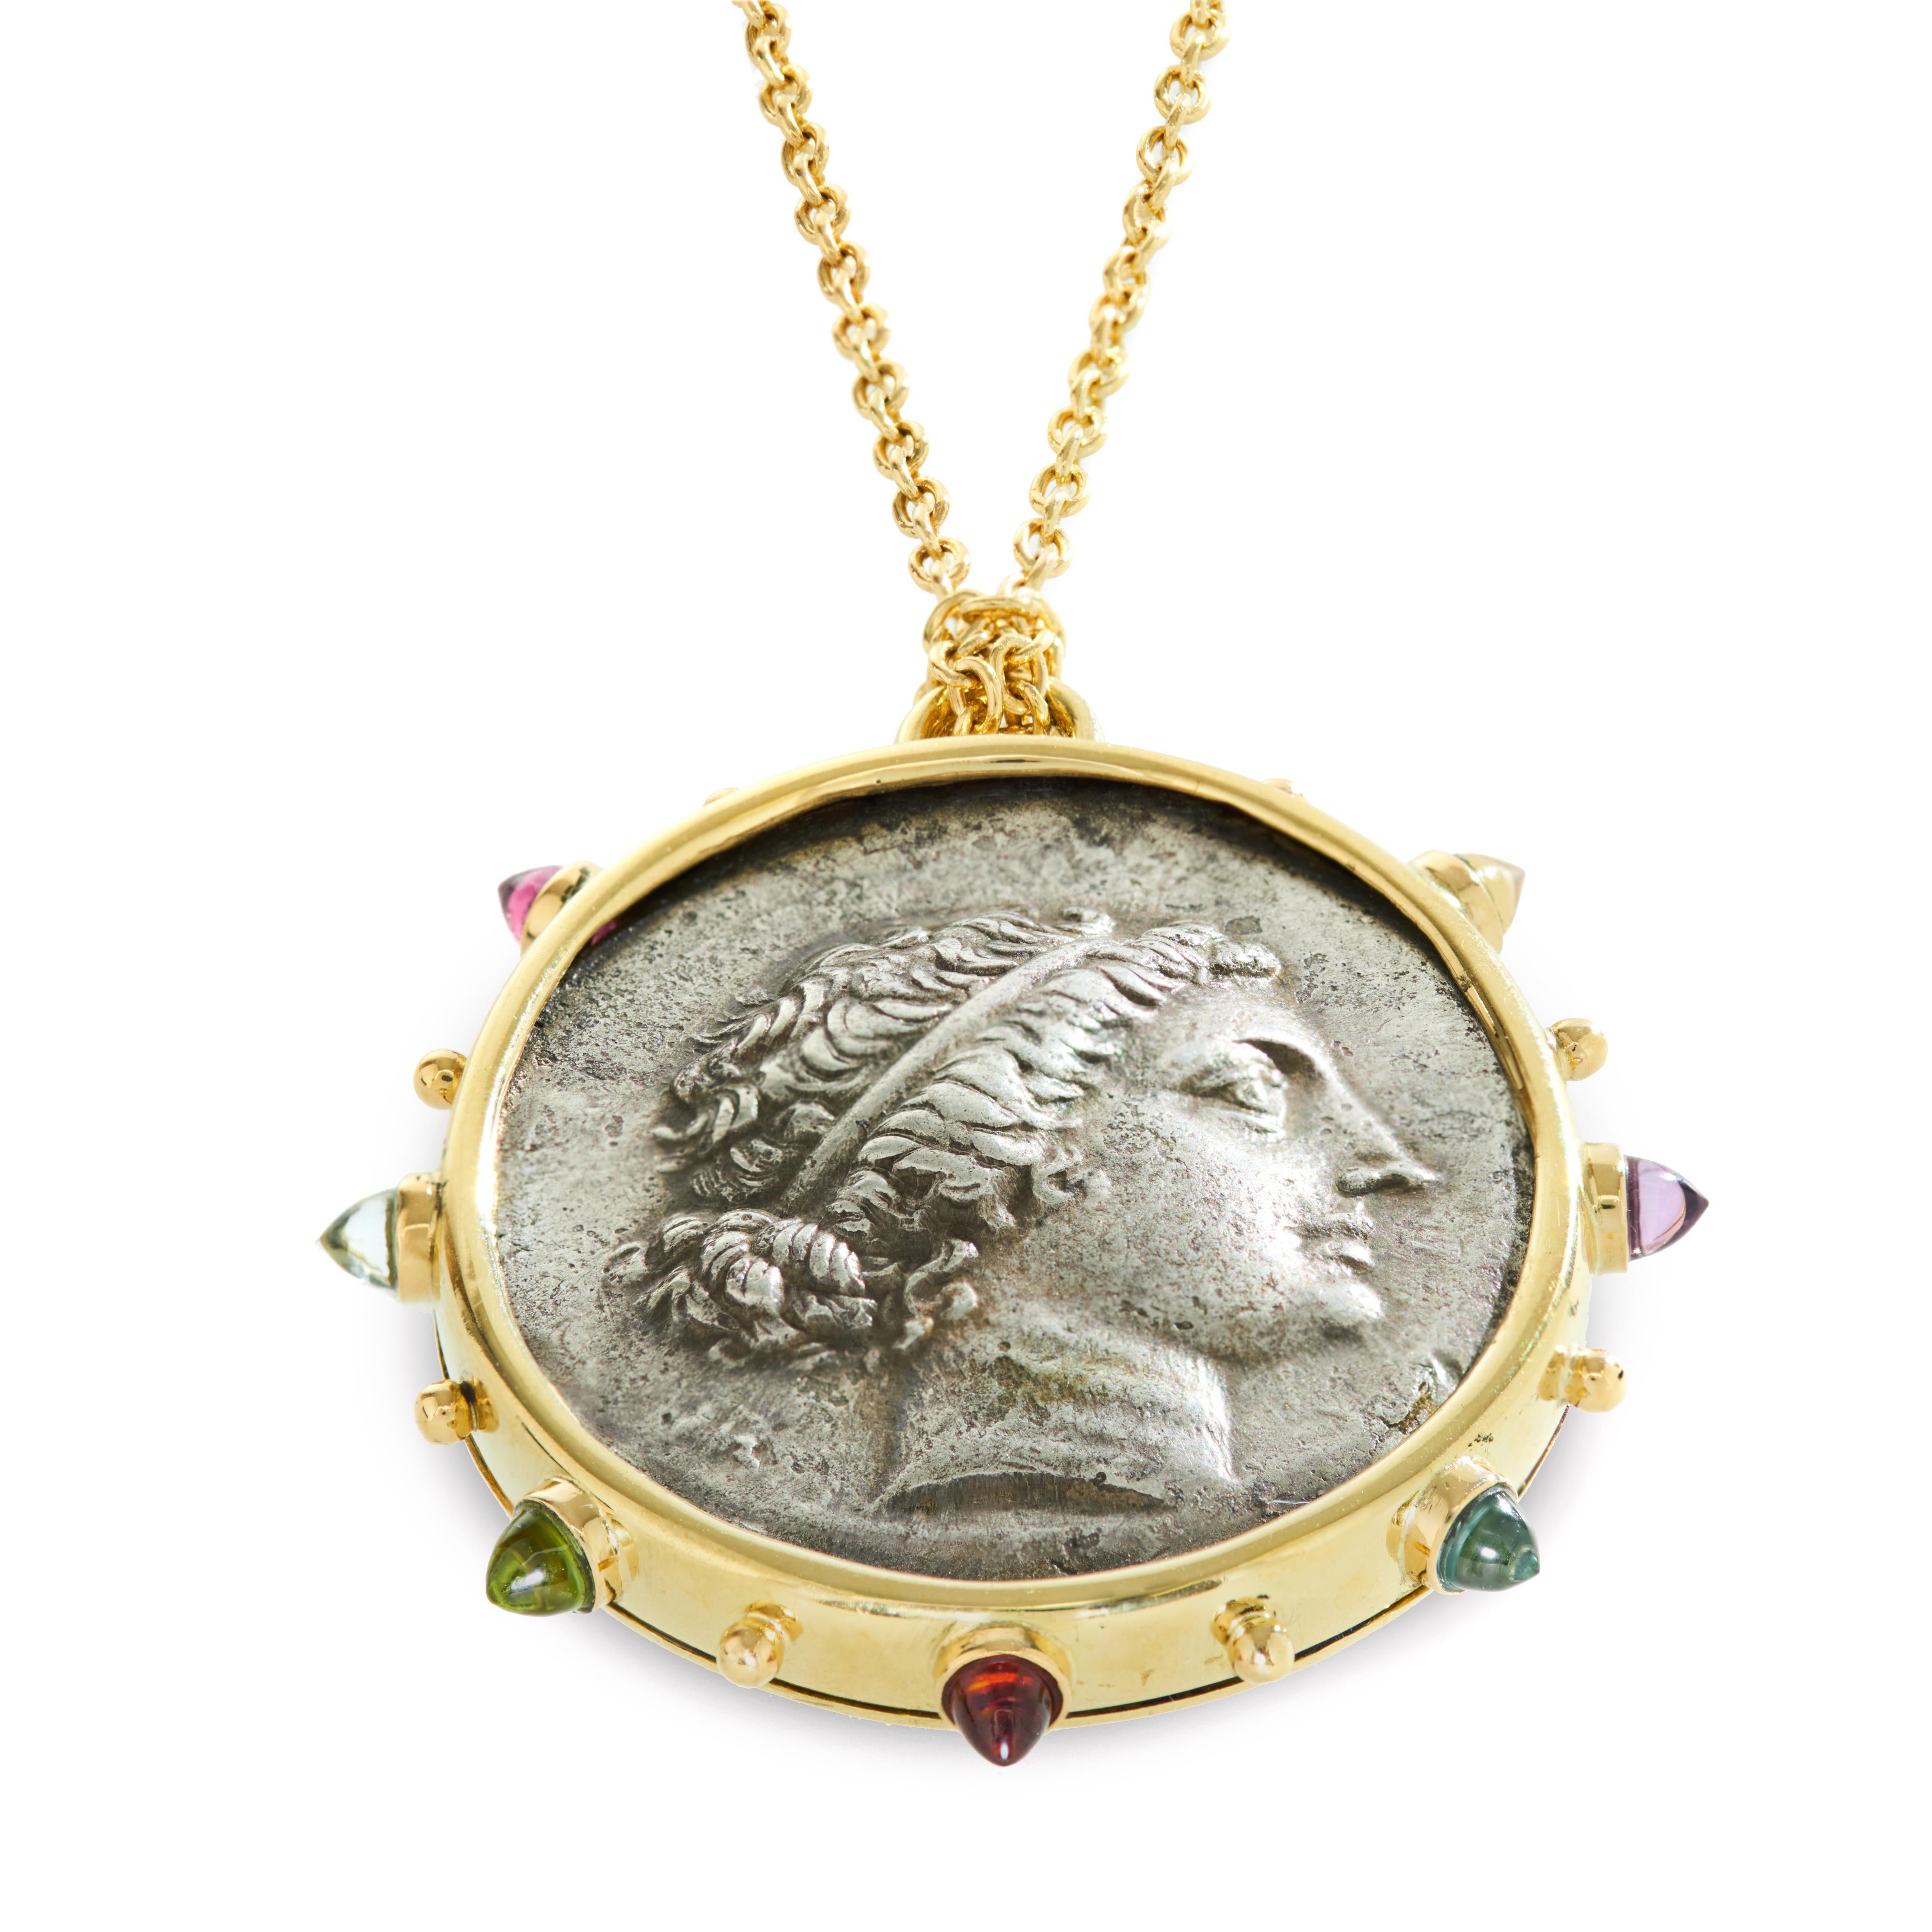 This DUBINI coin necklace from the 'Empires' collection features authentic silver coin minted in Aeolis, Kyme circa 155-143 B.C. set in 18K gold with citrine, amethyst, swiss topaz, garnet, peridot, sky topaz and rhodolite bullet